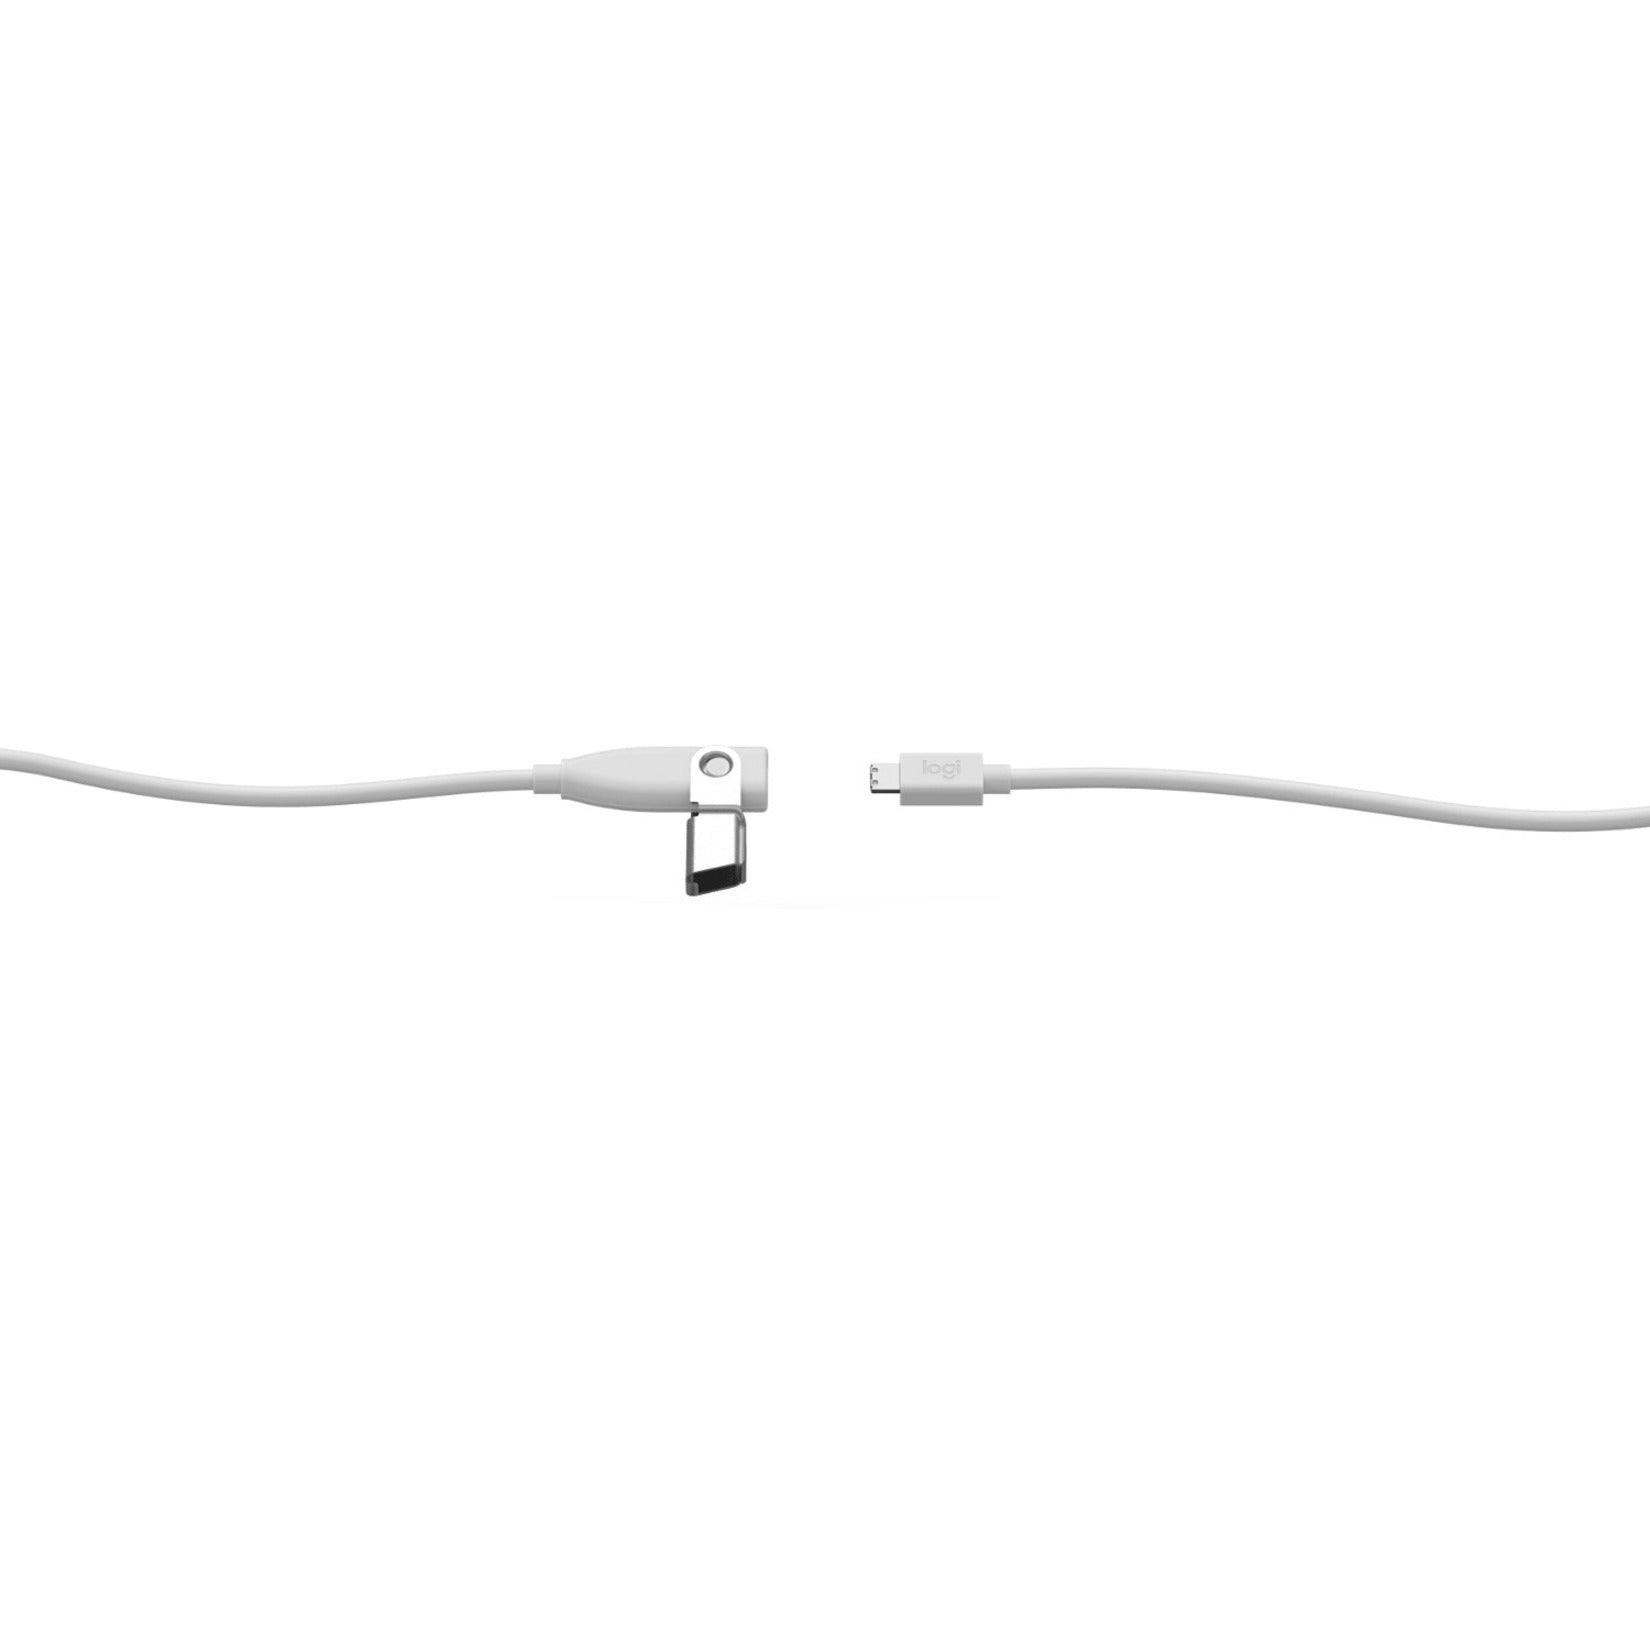 Logitech 952-000047 Rally Mic Pod Extension Cable 10 meter Extension Cable, Clip-on Cable, 32.81 ft